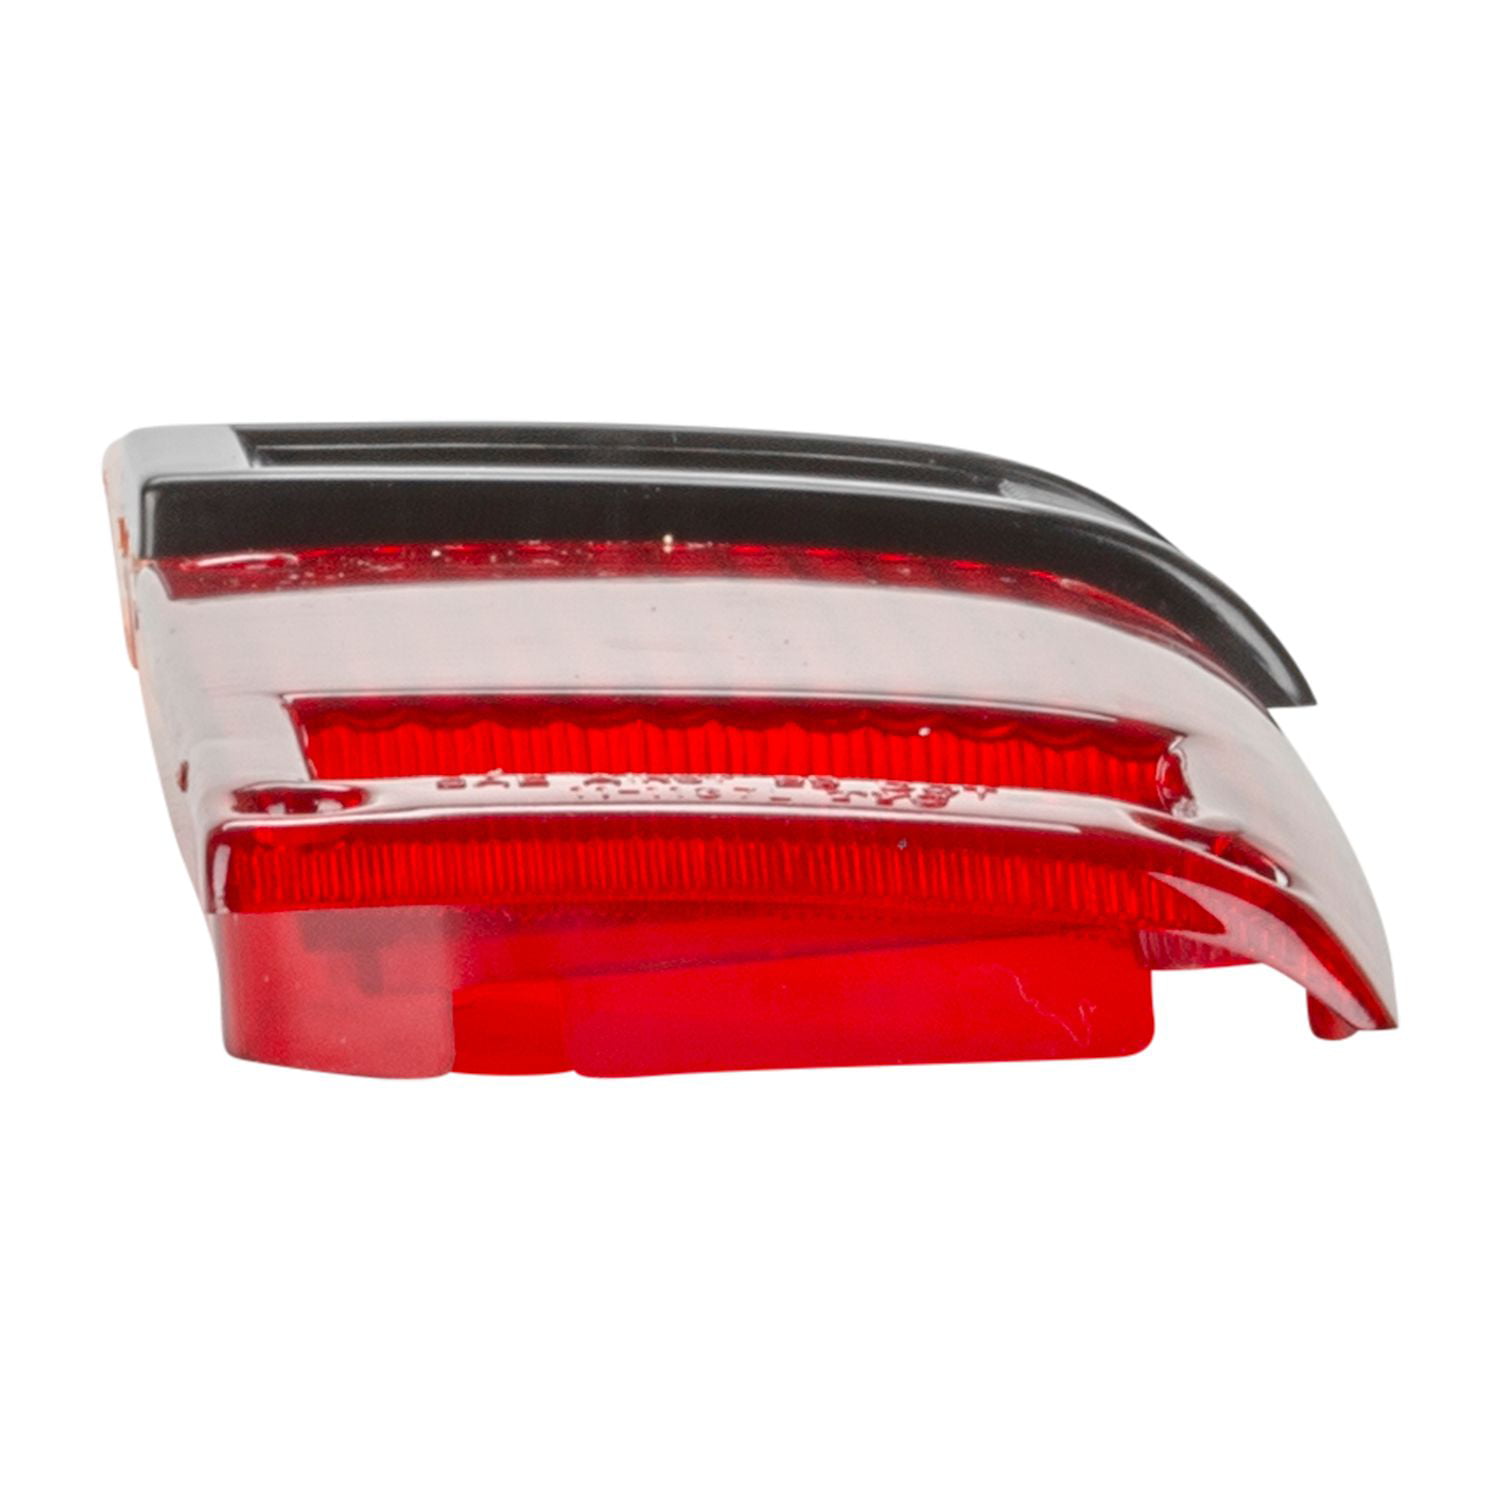 TYC 11-1137-02 Right Side Tail Light Lens Only for 79-83 Toyota Pickup TO2809103 